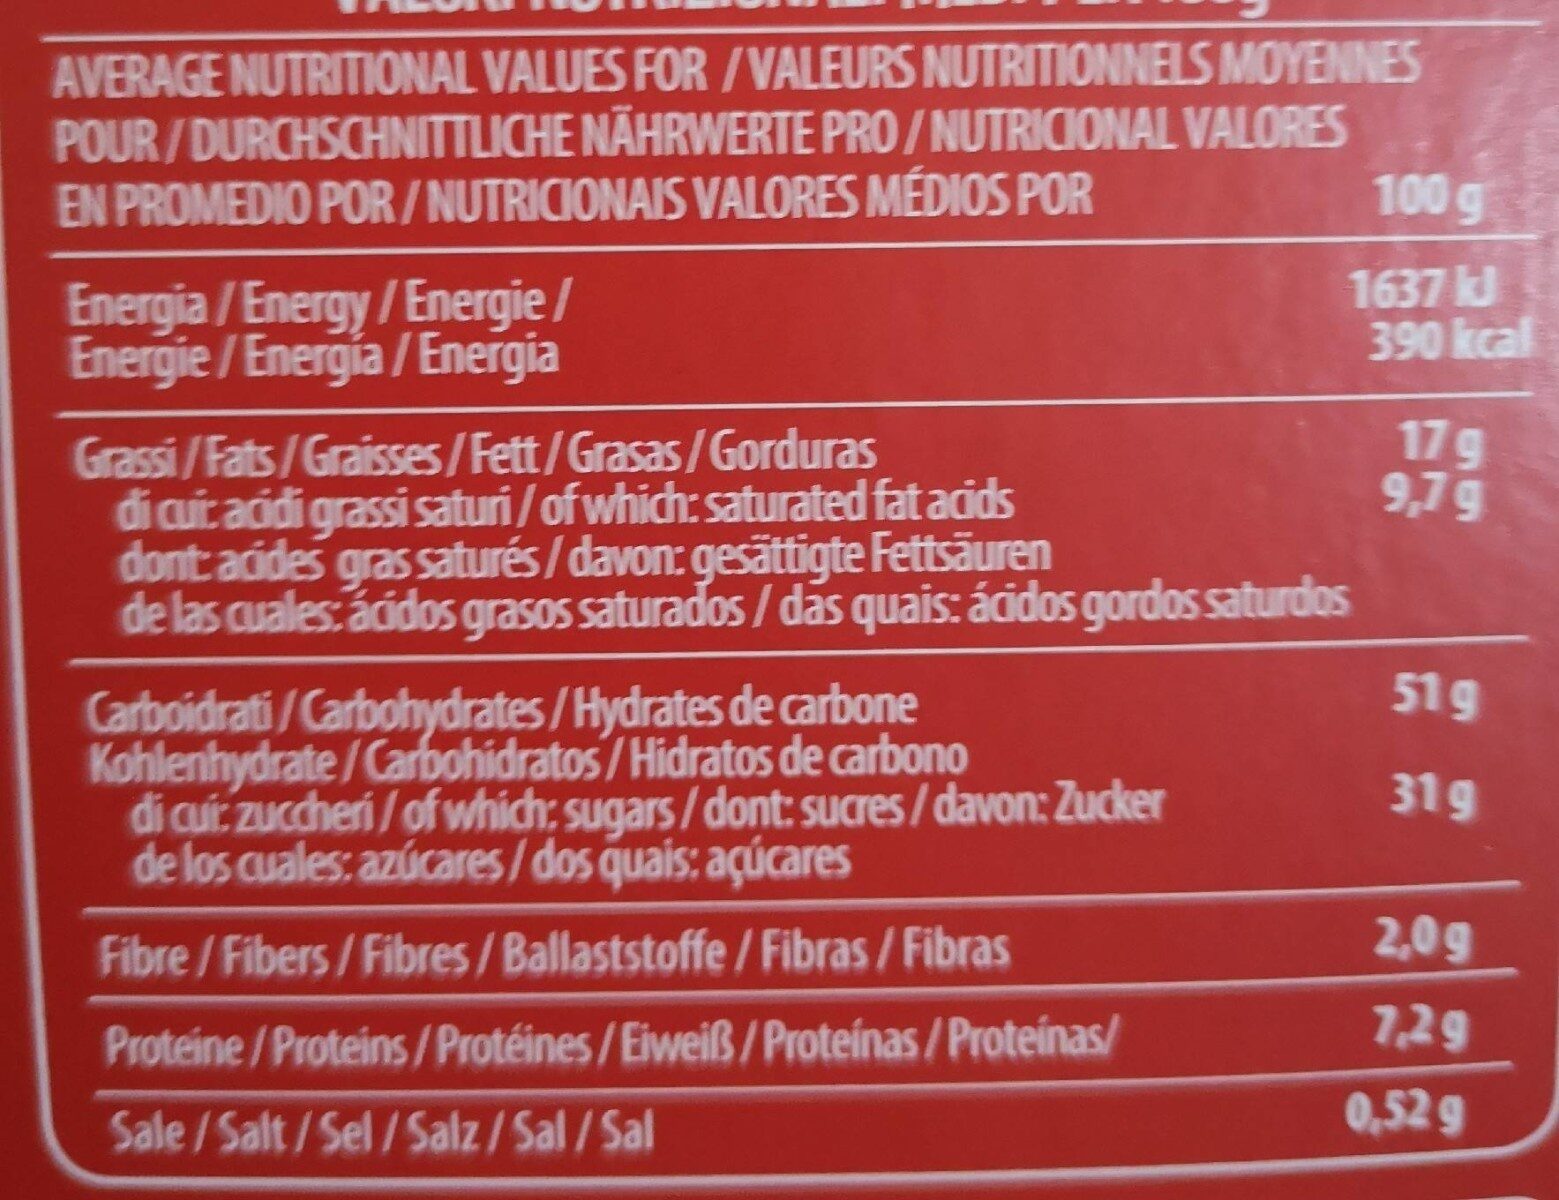 Colomba soffice - Nutrition facts - it